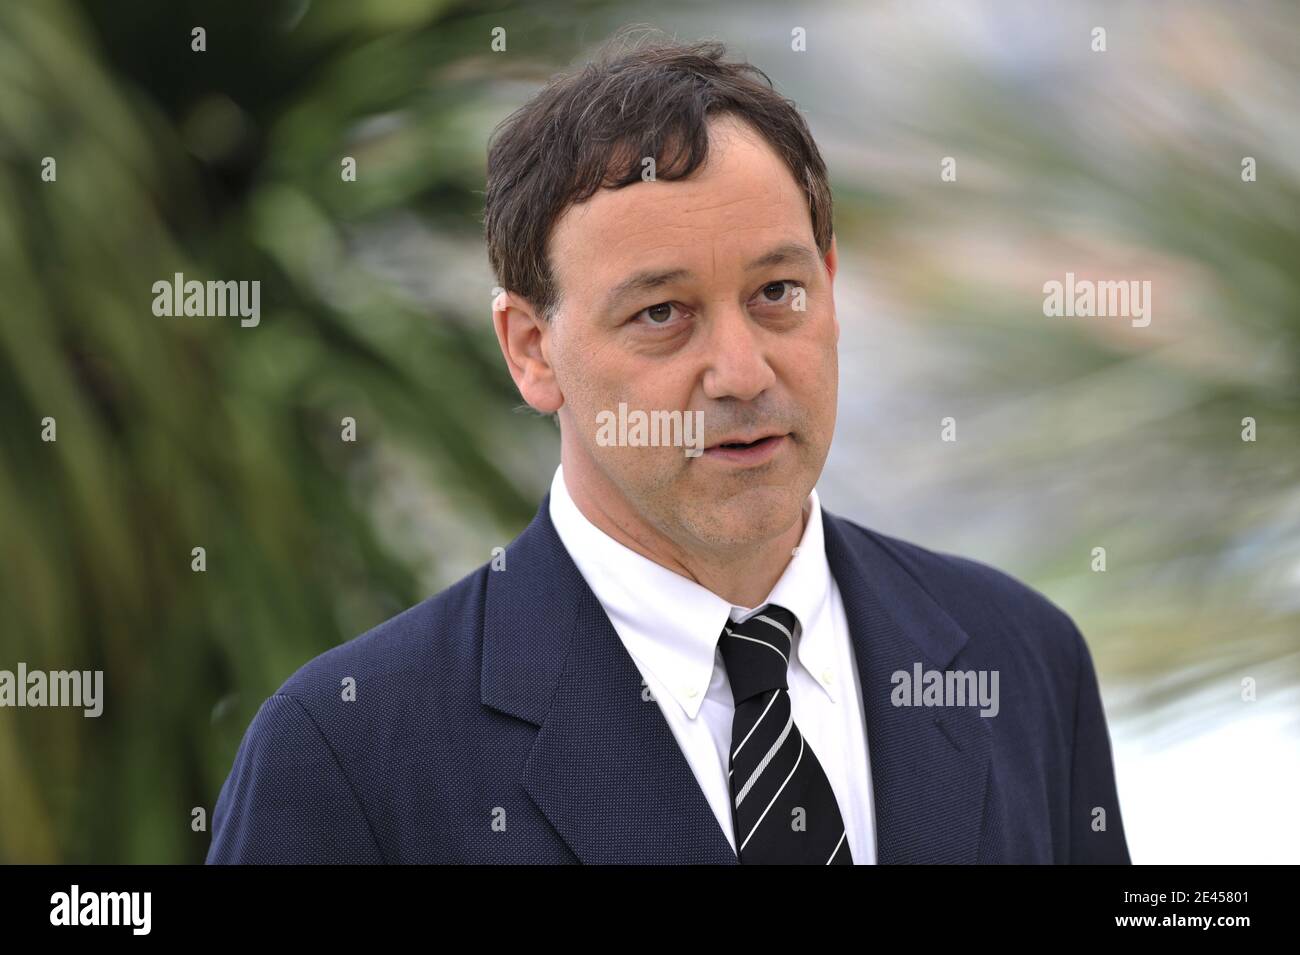 Sam Raimi attends the photocall for the film 'Drag Me To Hell at the Palais des Festival during 62nd International Cannes Film Festival in Cannes, France on May 21, 2009. Photo by Nebinger-Orban/ABACAPRESS.COM Stock Photo